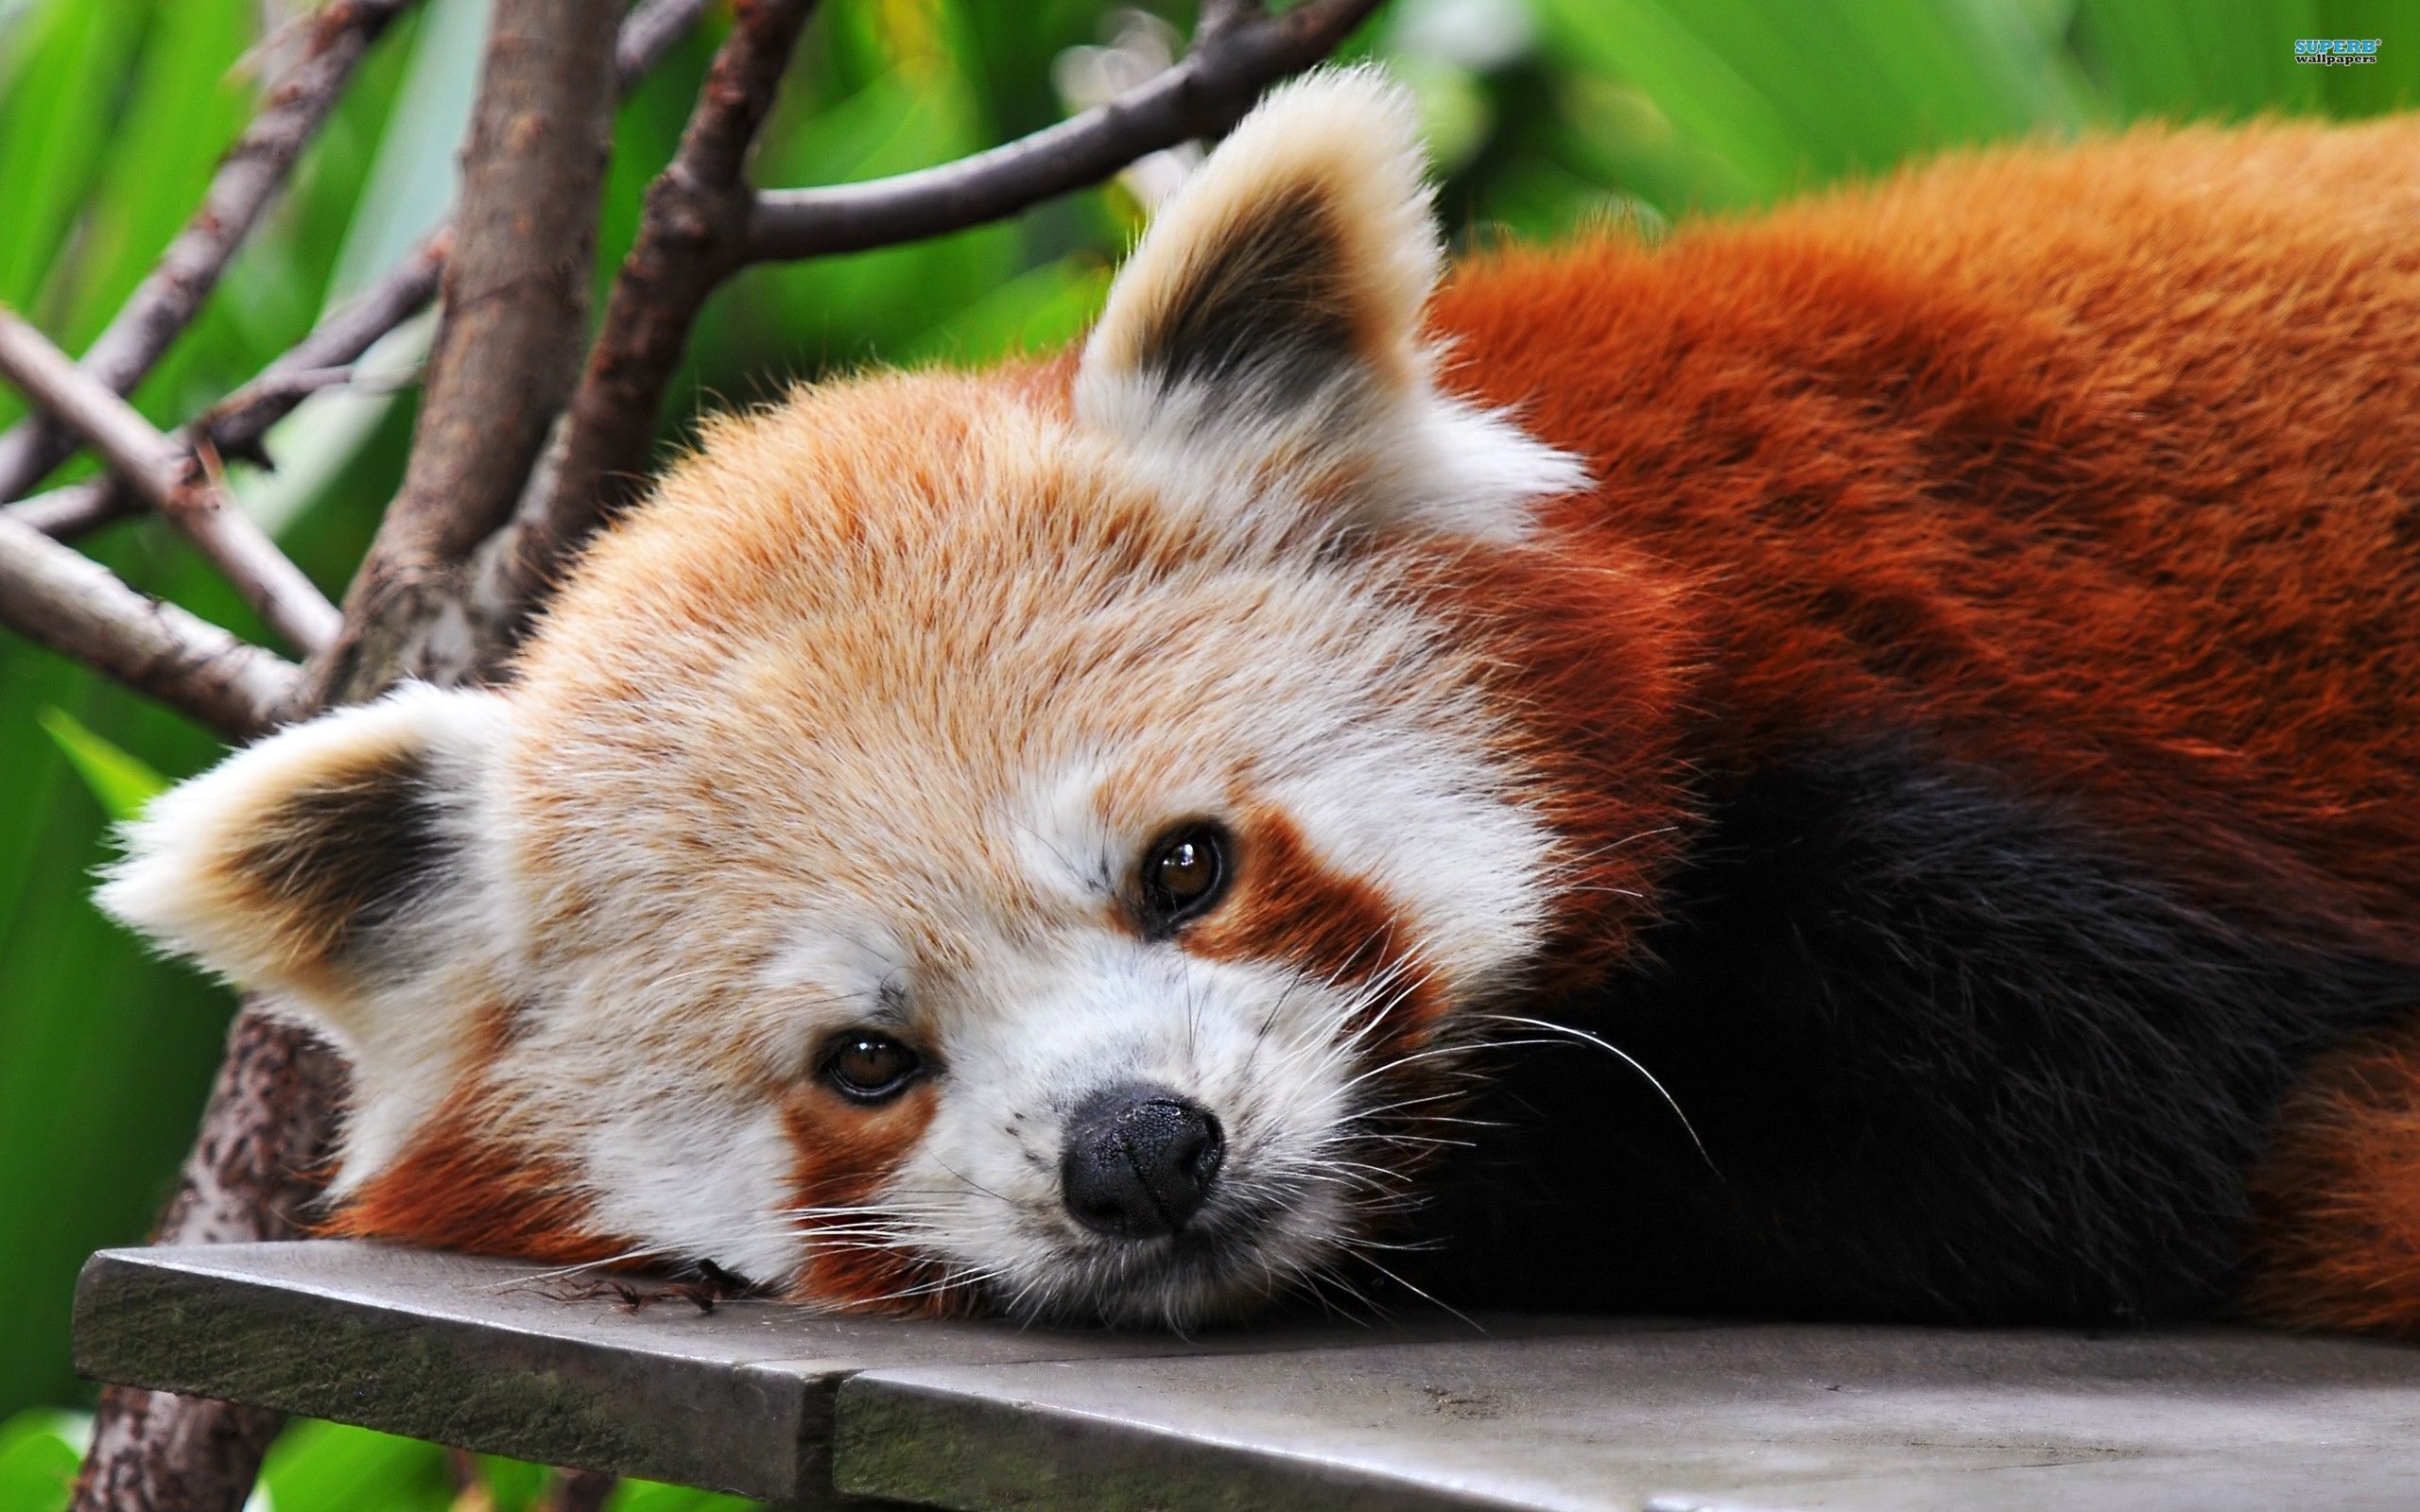 red panda wallpaper high resolution with wallpaper HD resolution on animals category similar with abstract anime baby. Cute animals, Red panda, Cute baby animals